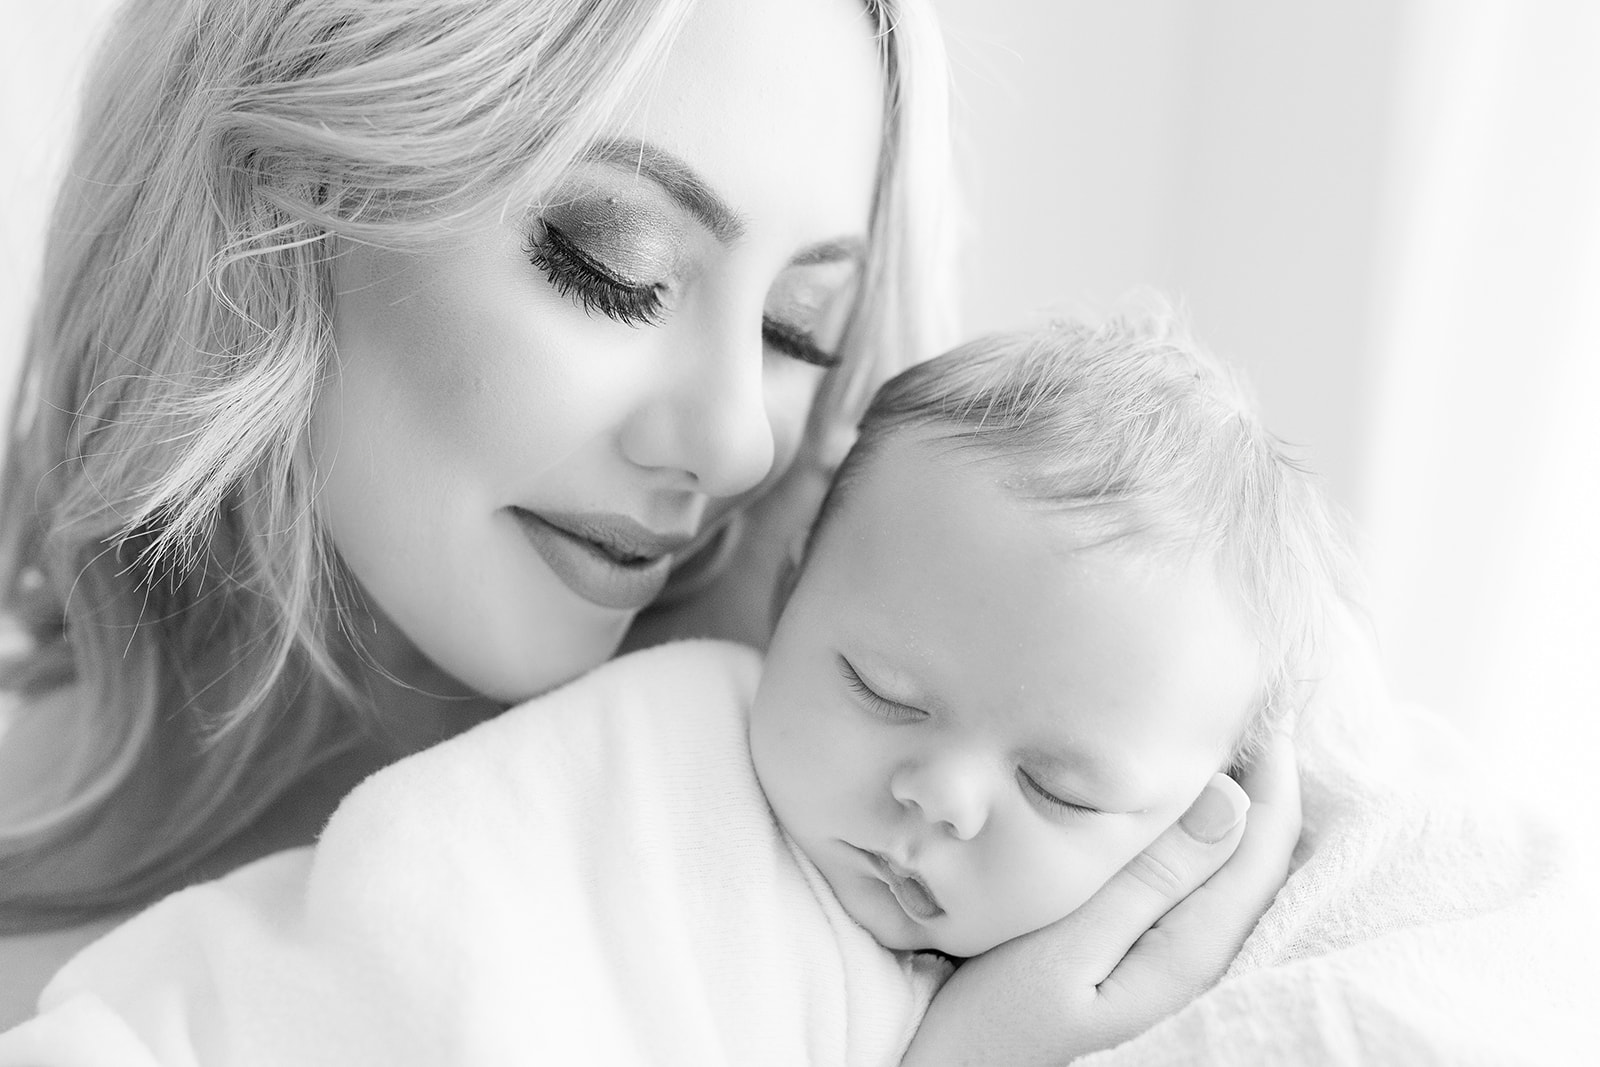 A mother with long blonde hair snuggles with her sleeping newborn baby